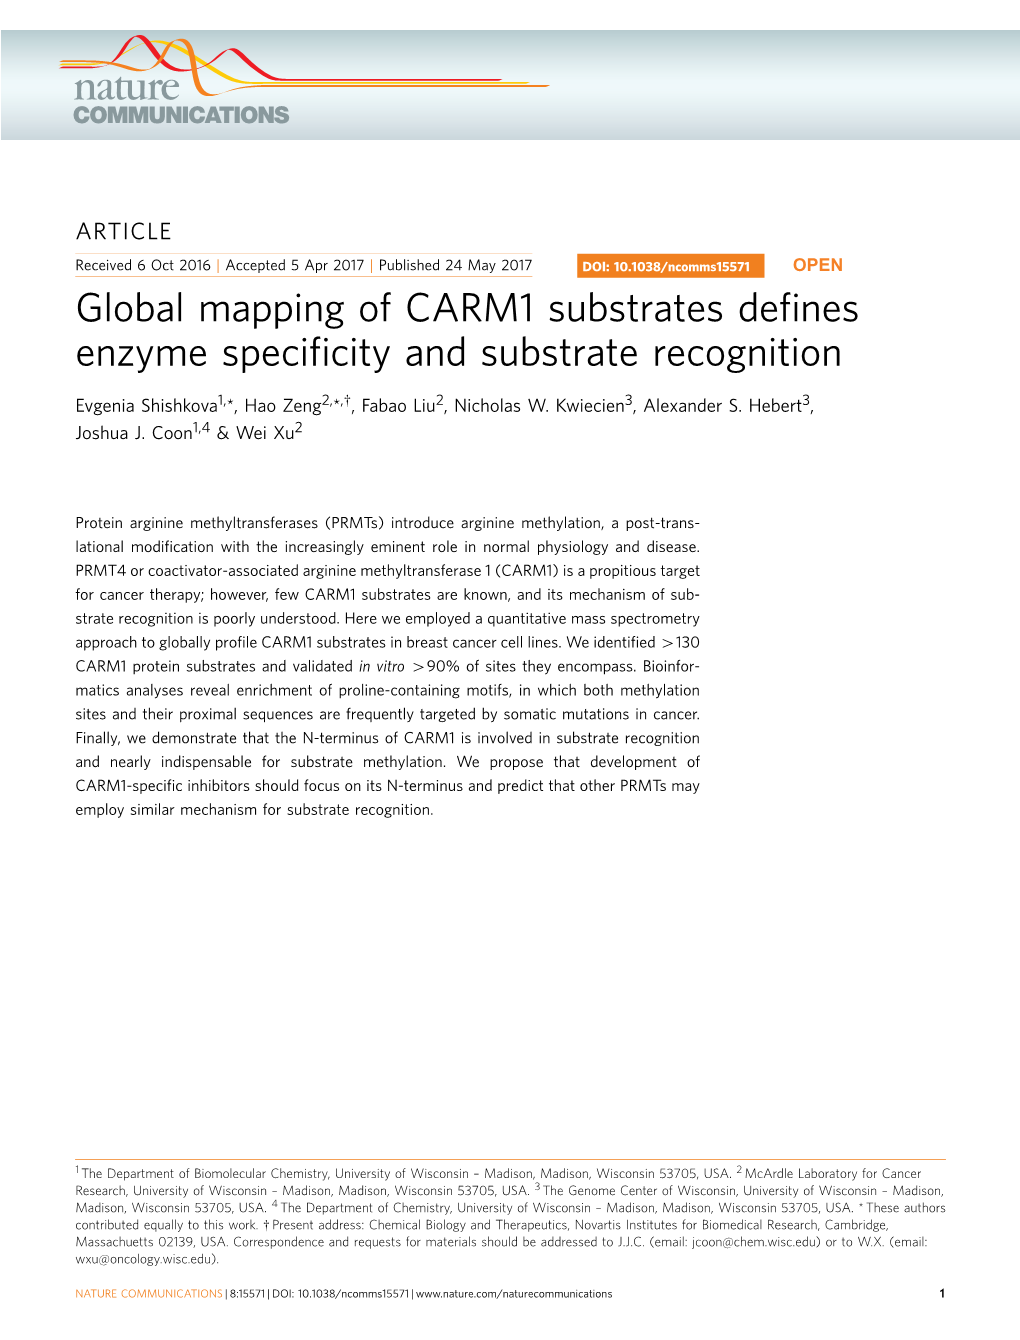 Global Mapping of CARM1 Substrates Defines Enzyme Specificity and Substrate Recognition